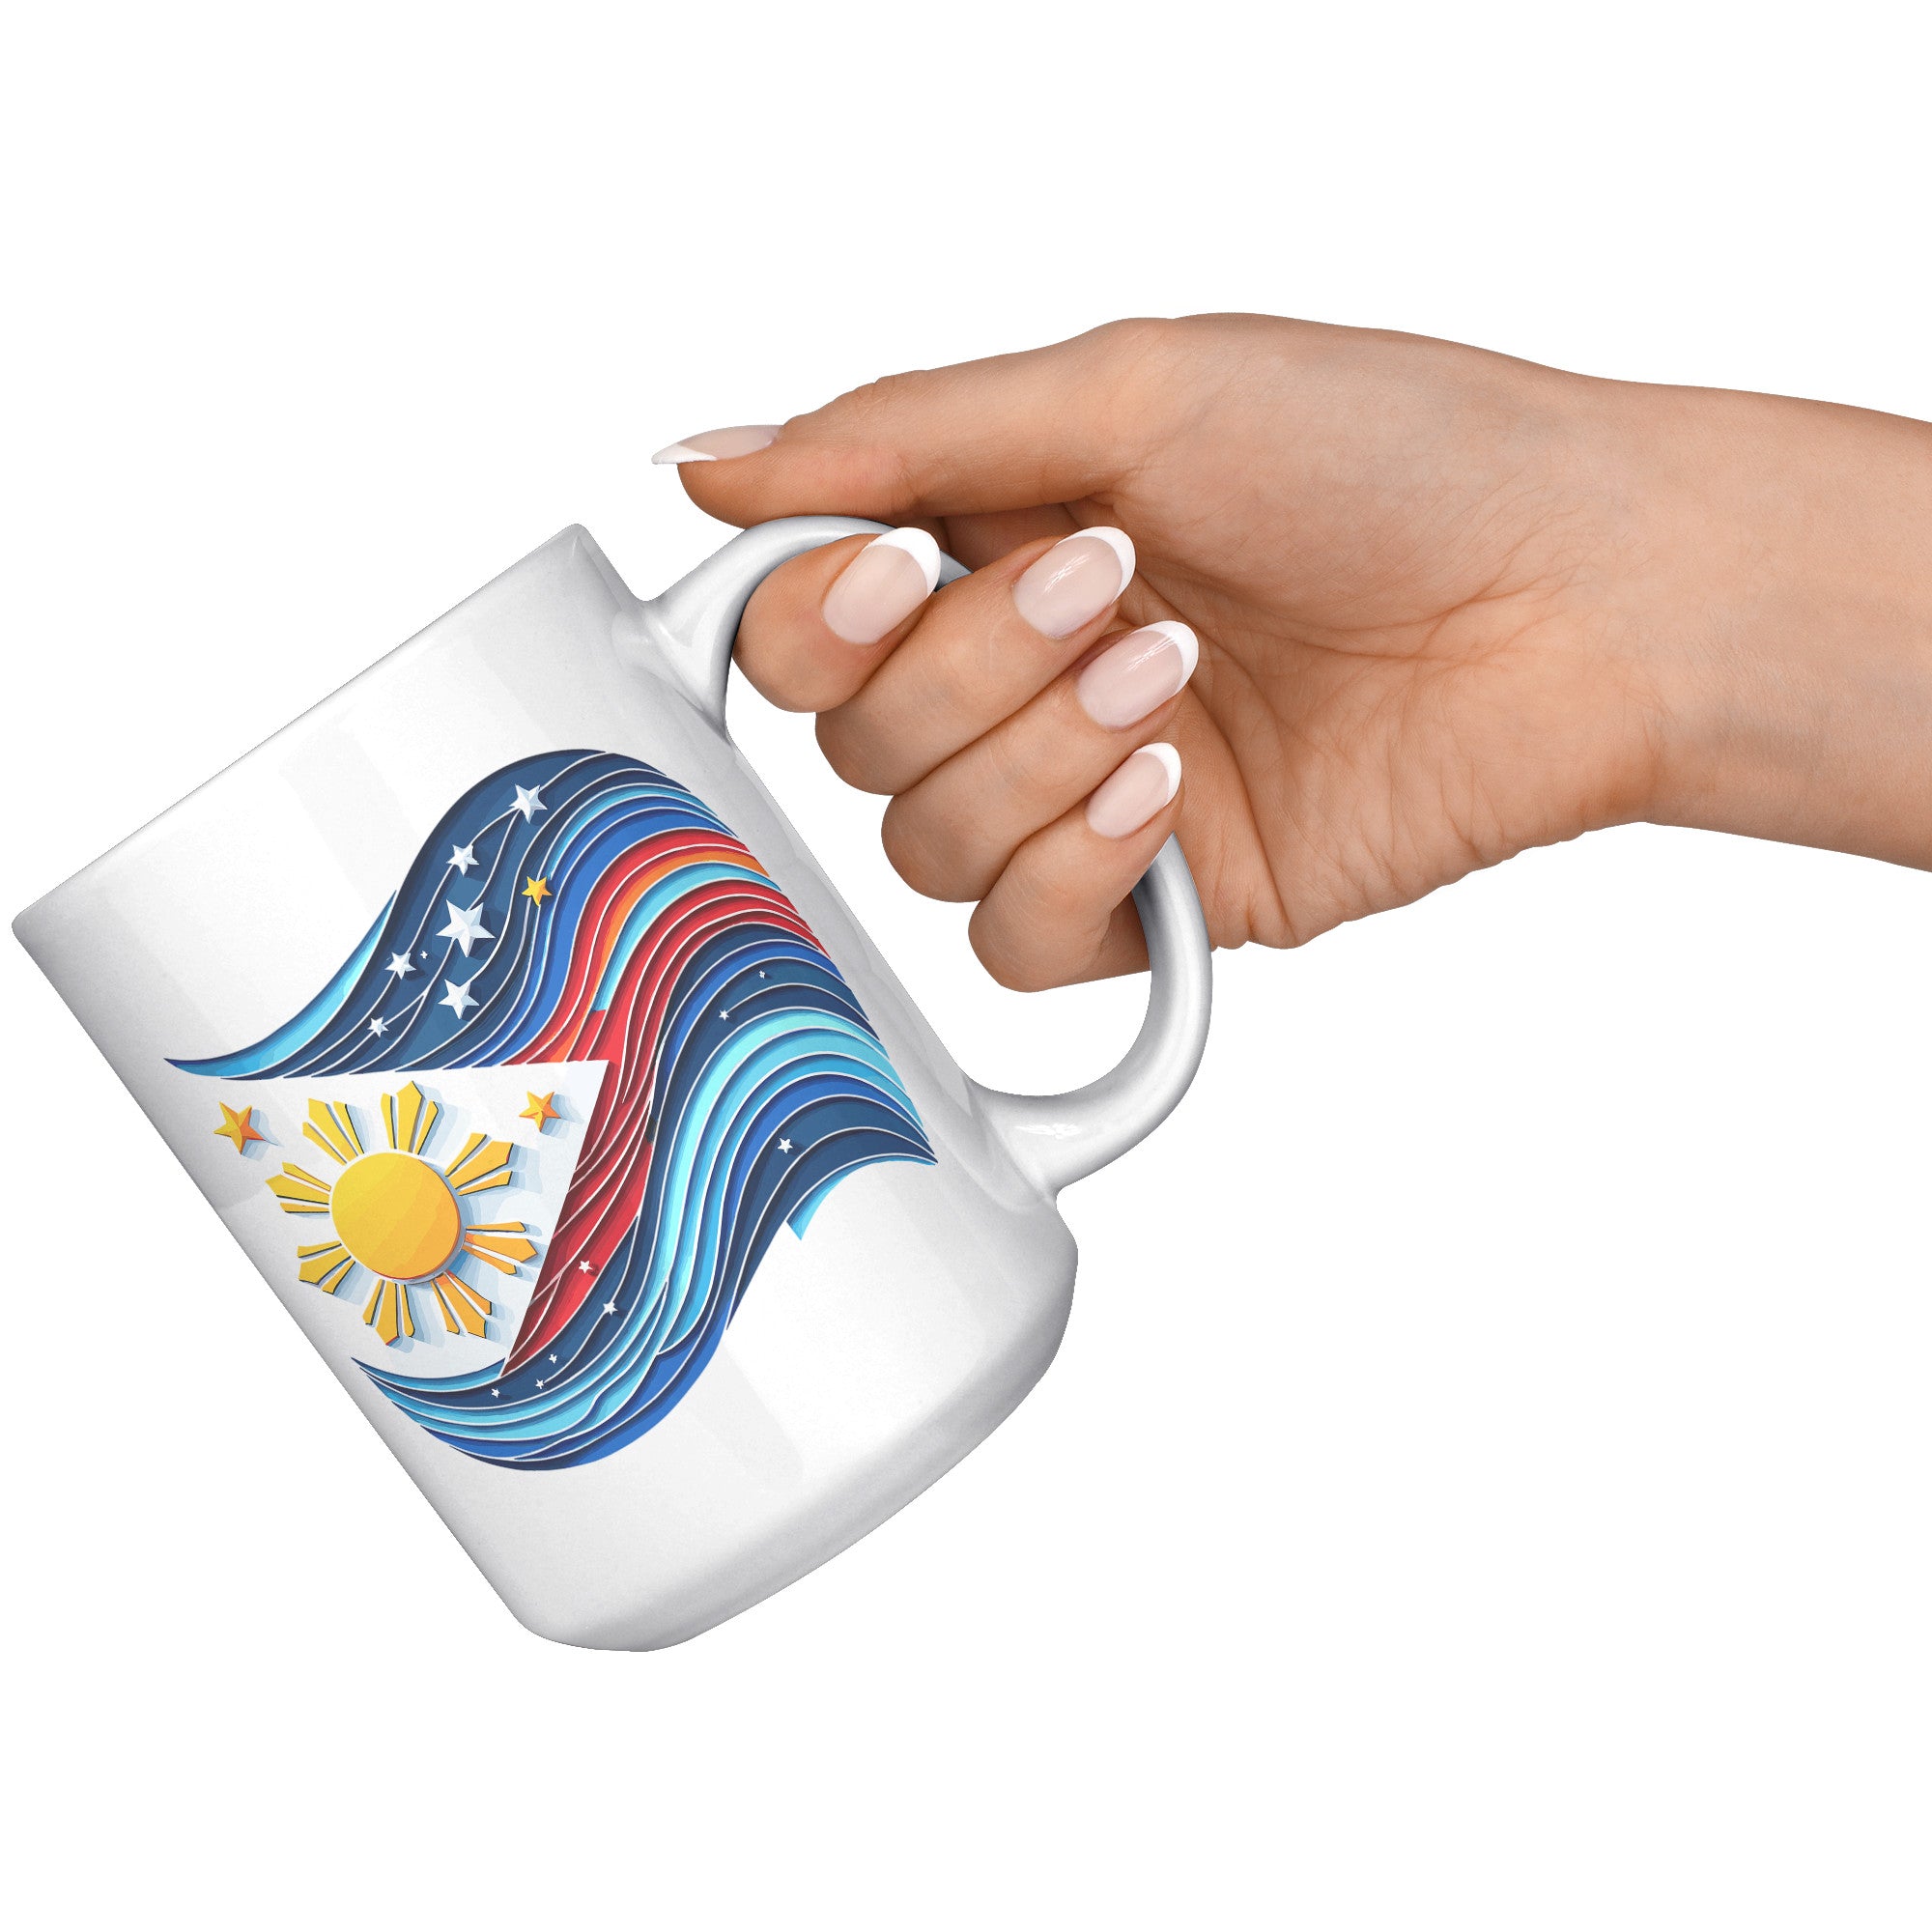 Proudly Pinoy Coffee Mug - Vibrant Filipino Flag Design - Patriotic Gift for Filipinos - Celebrate Heritage with Every Sip!" - K1